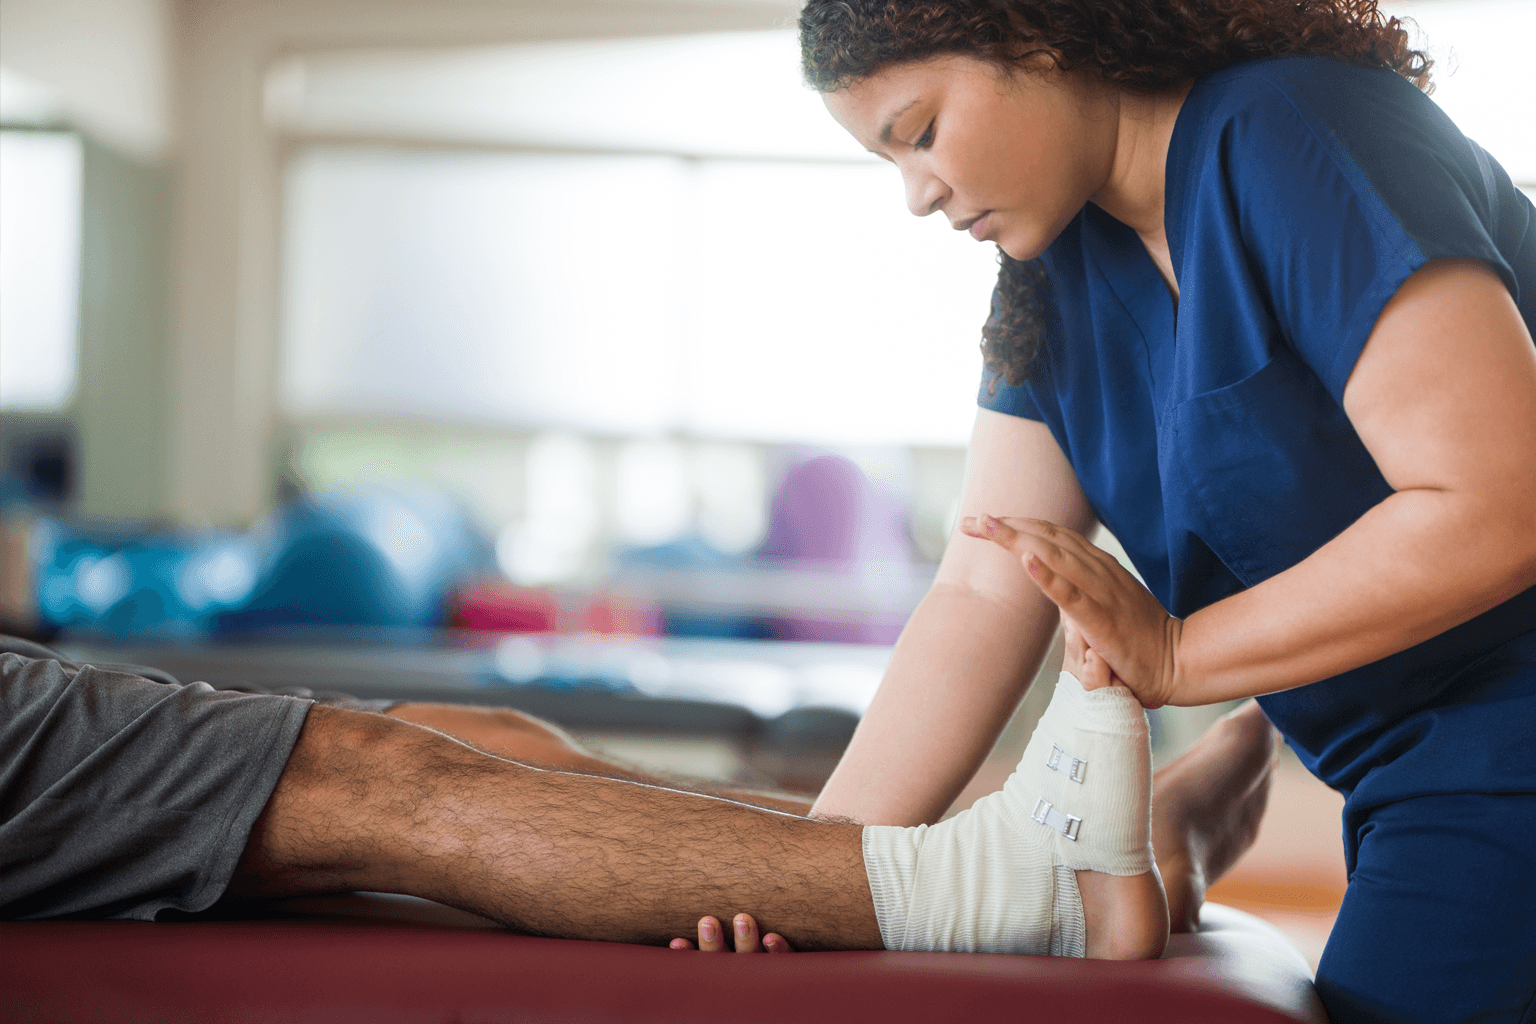 A woman medical professional helps a patient stretch a bandaged ankle.